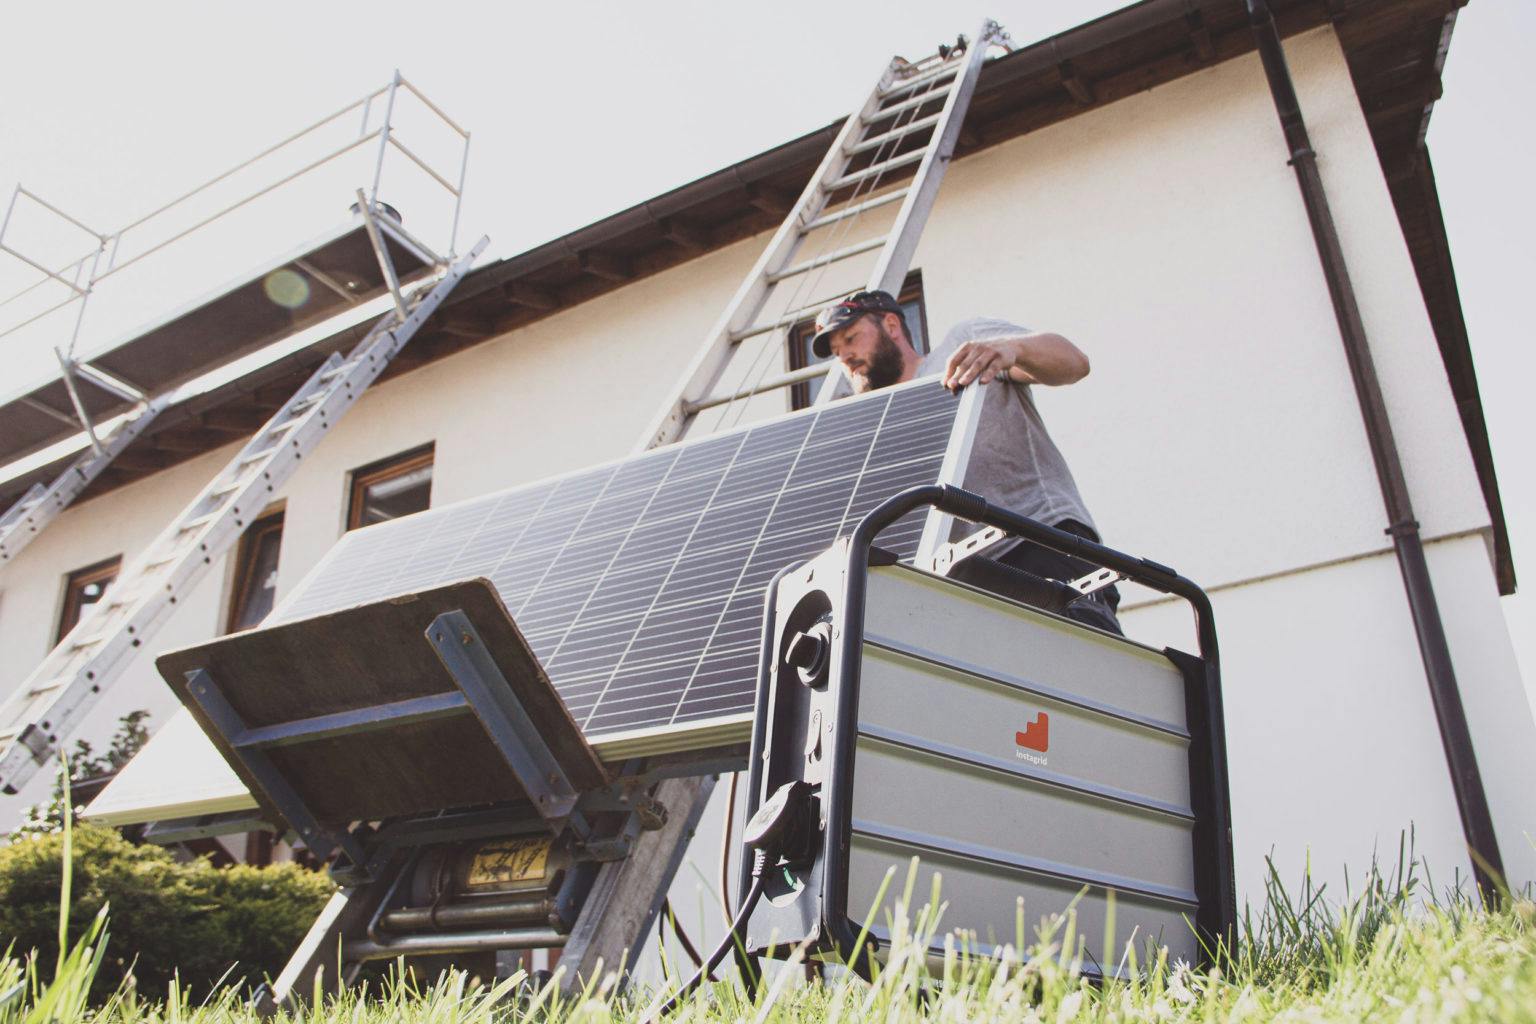 Using instagrid to lift solar panels up to the roof